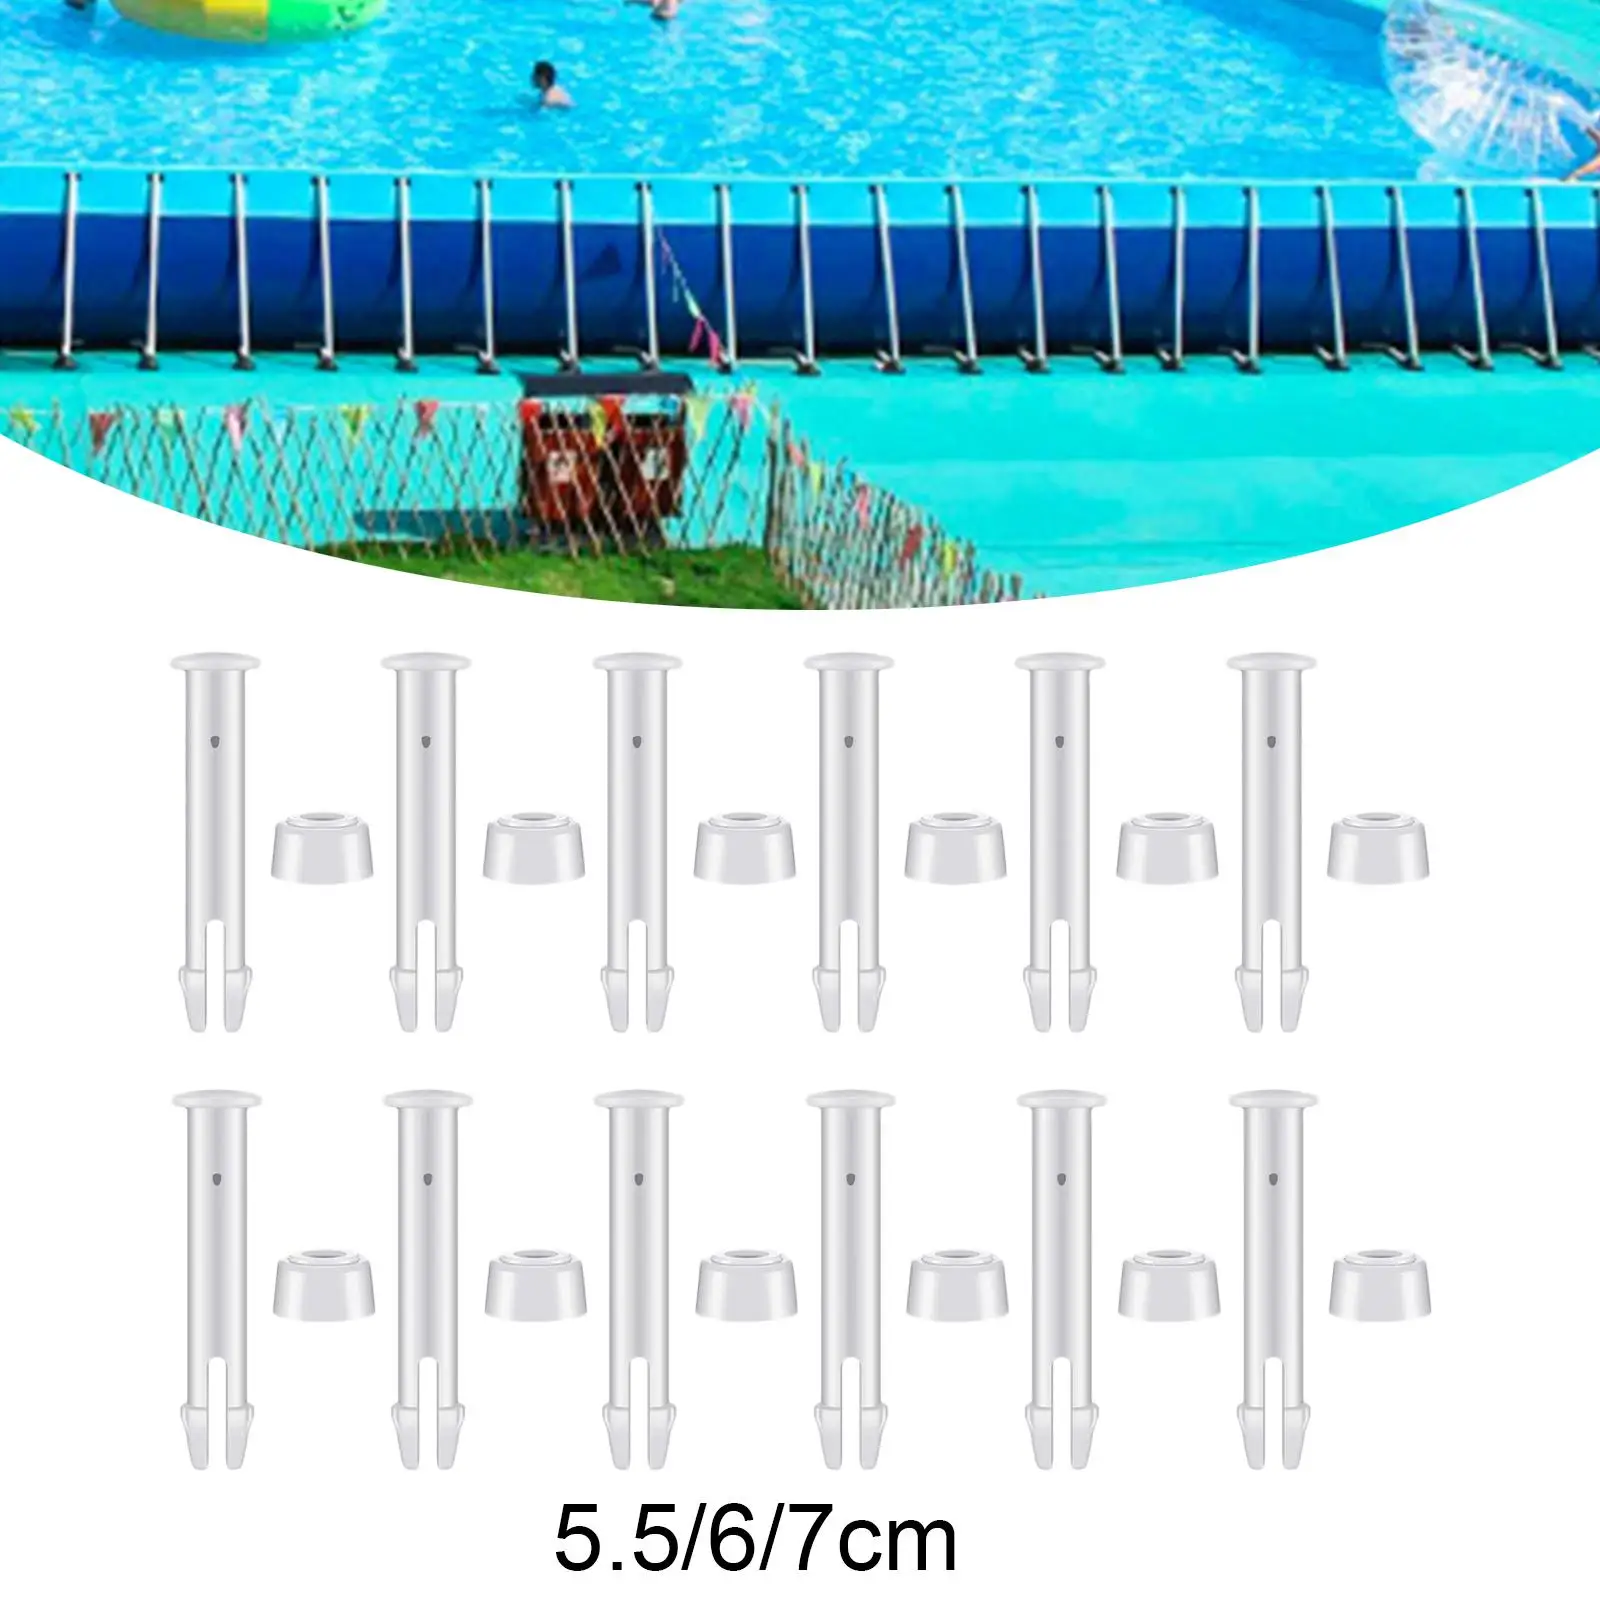 12Pcs 2.17/2.36/2.76inch Pool Joint Pins and Rubber Seals Swimming Pool Replacement Parts